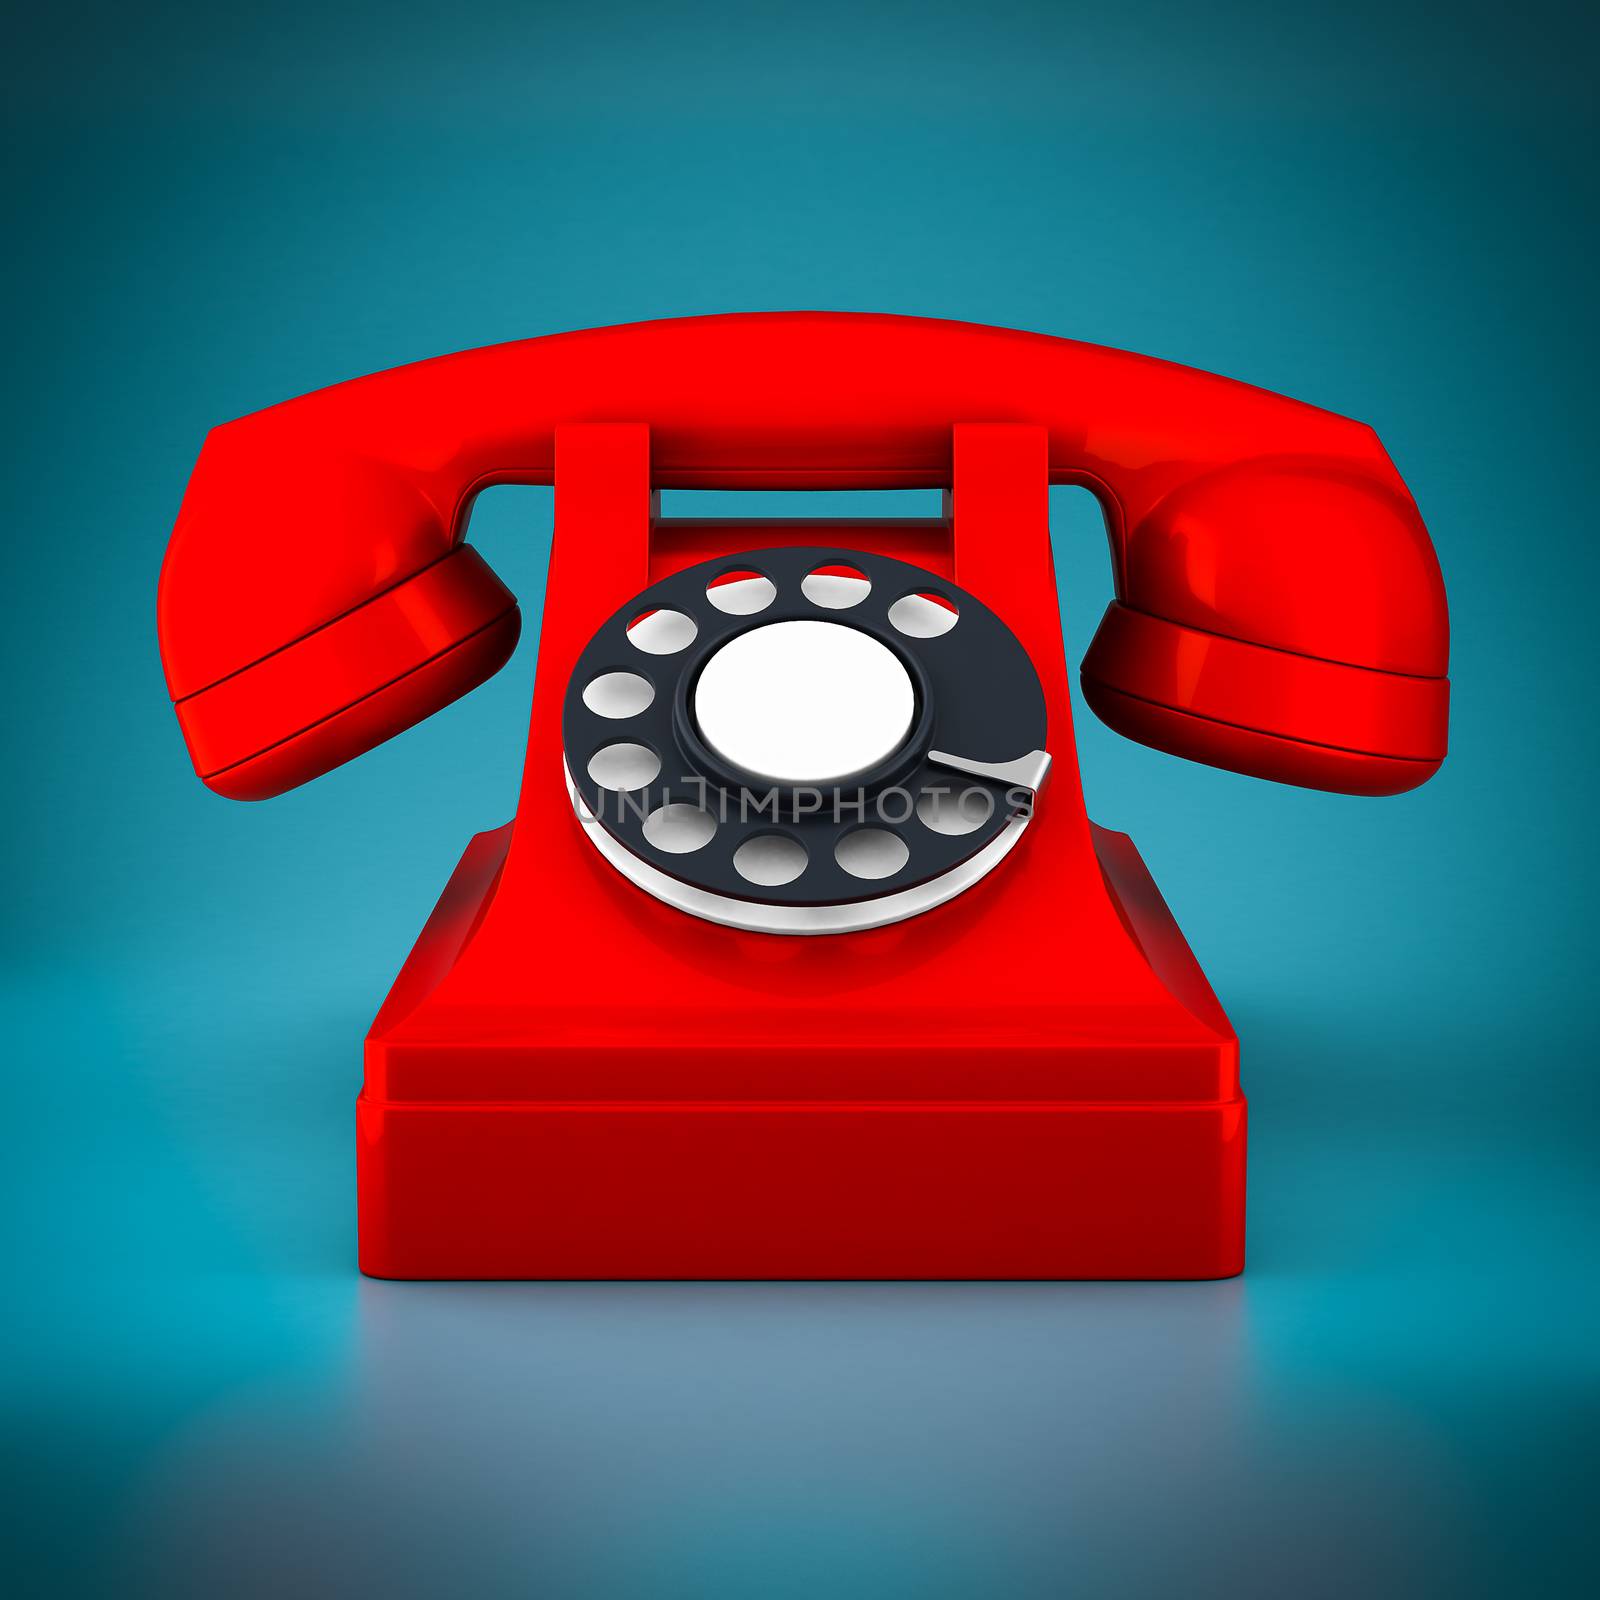 beautiful red phone on a blue background